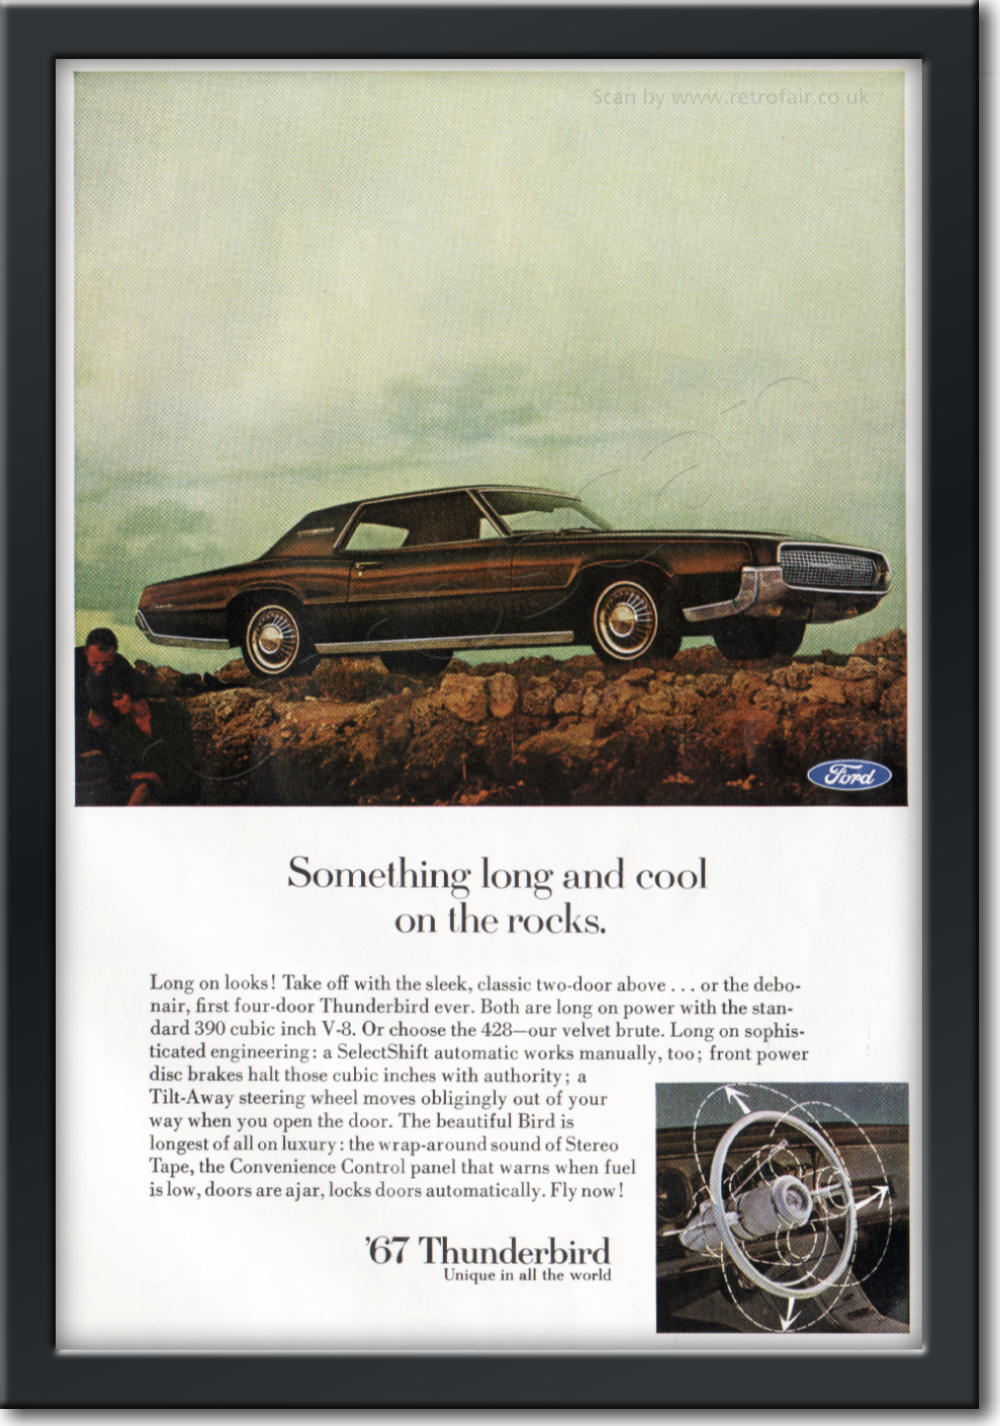 1966 Ford Thunderbird - framed preview vintage ad